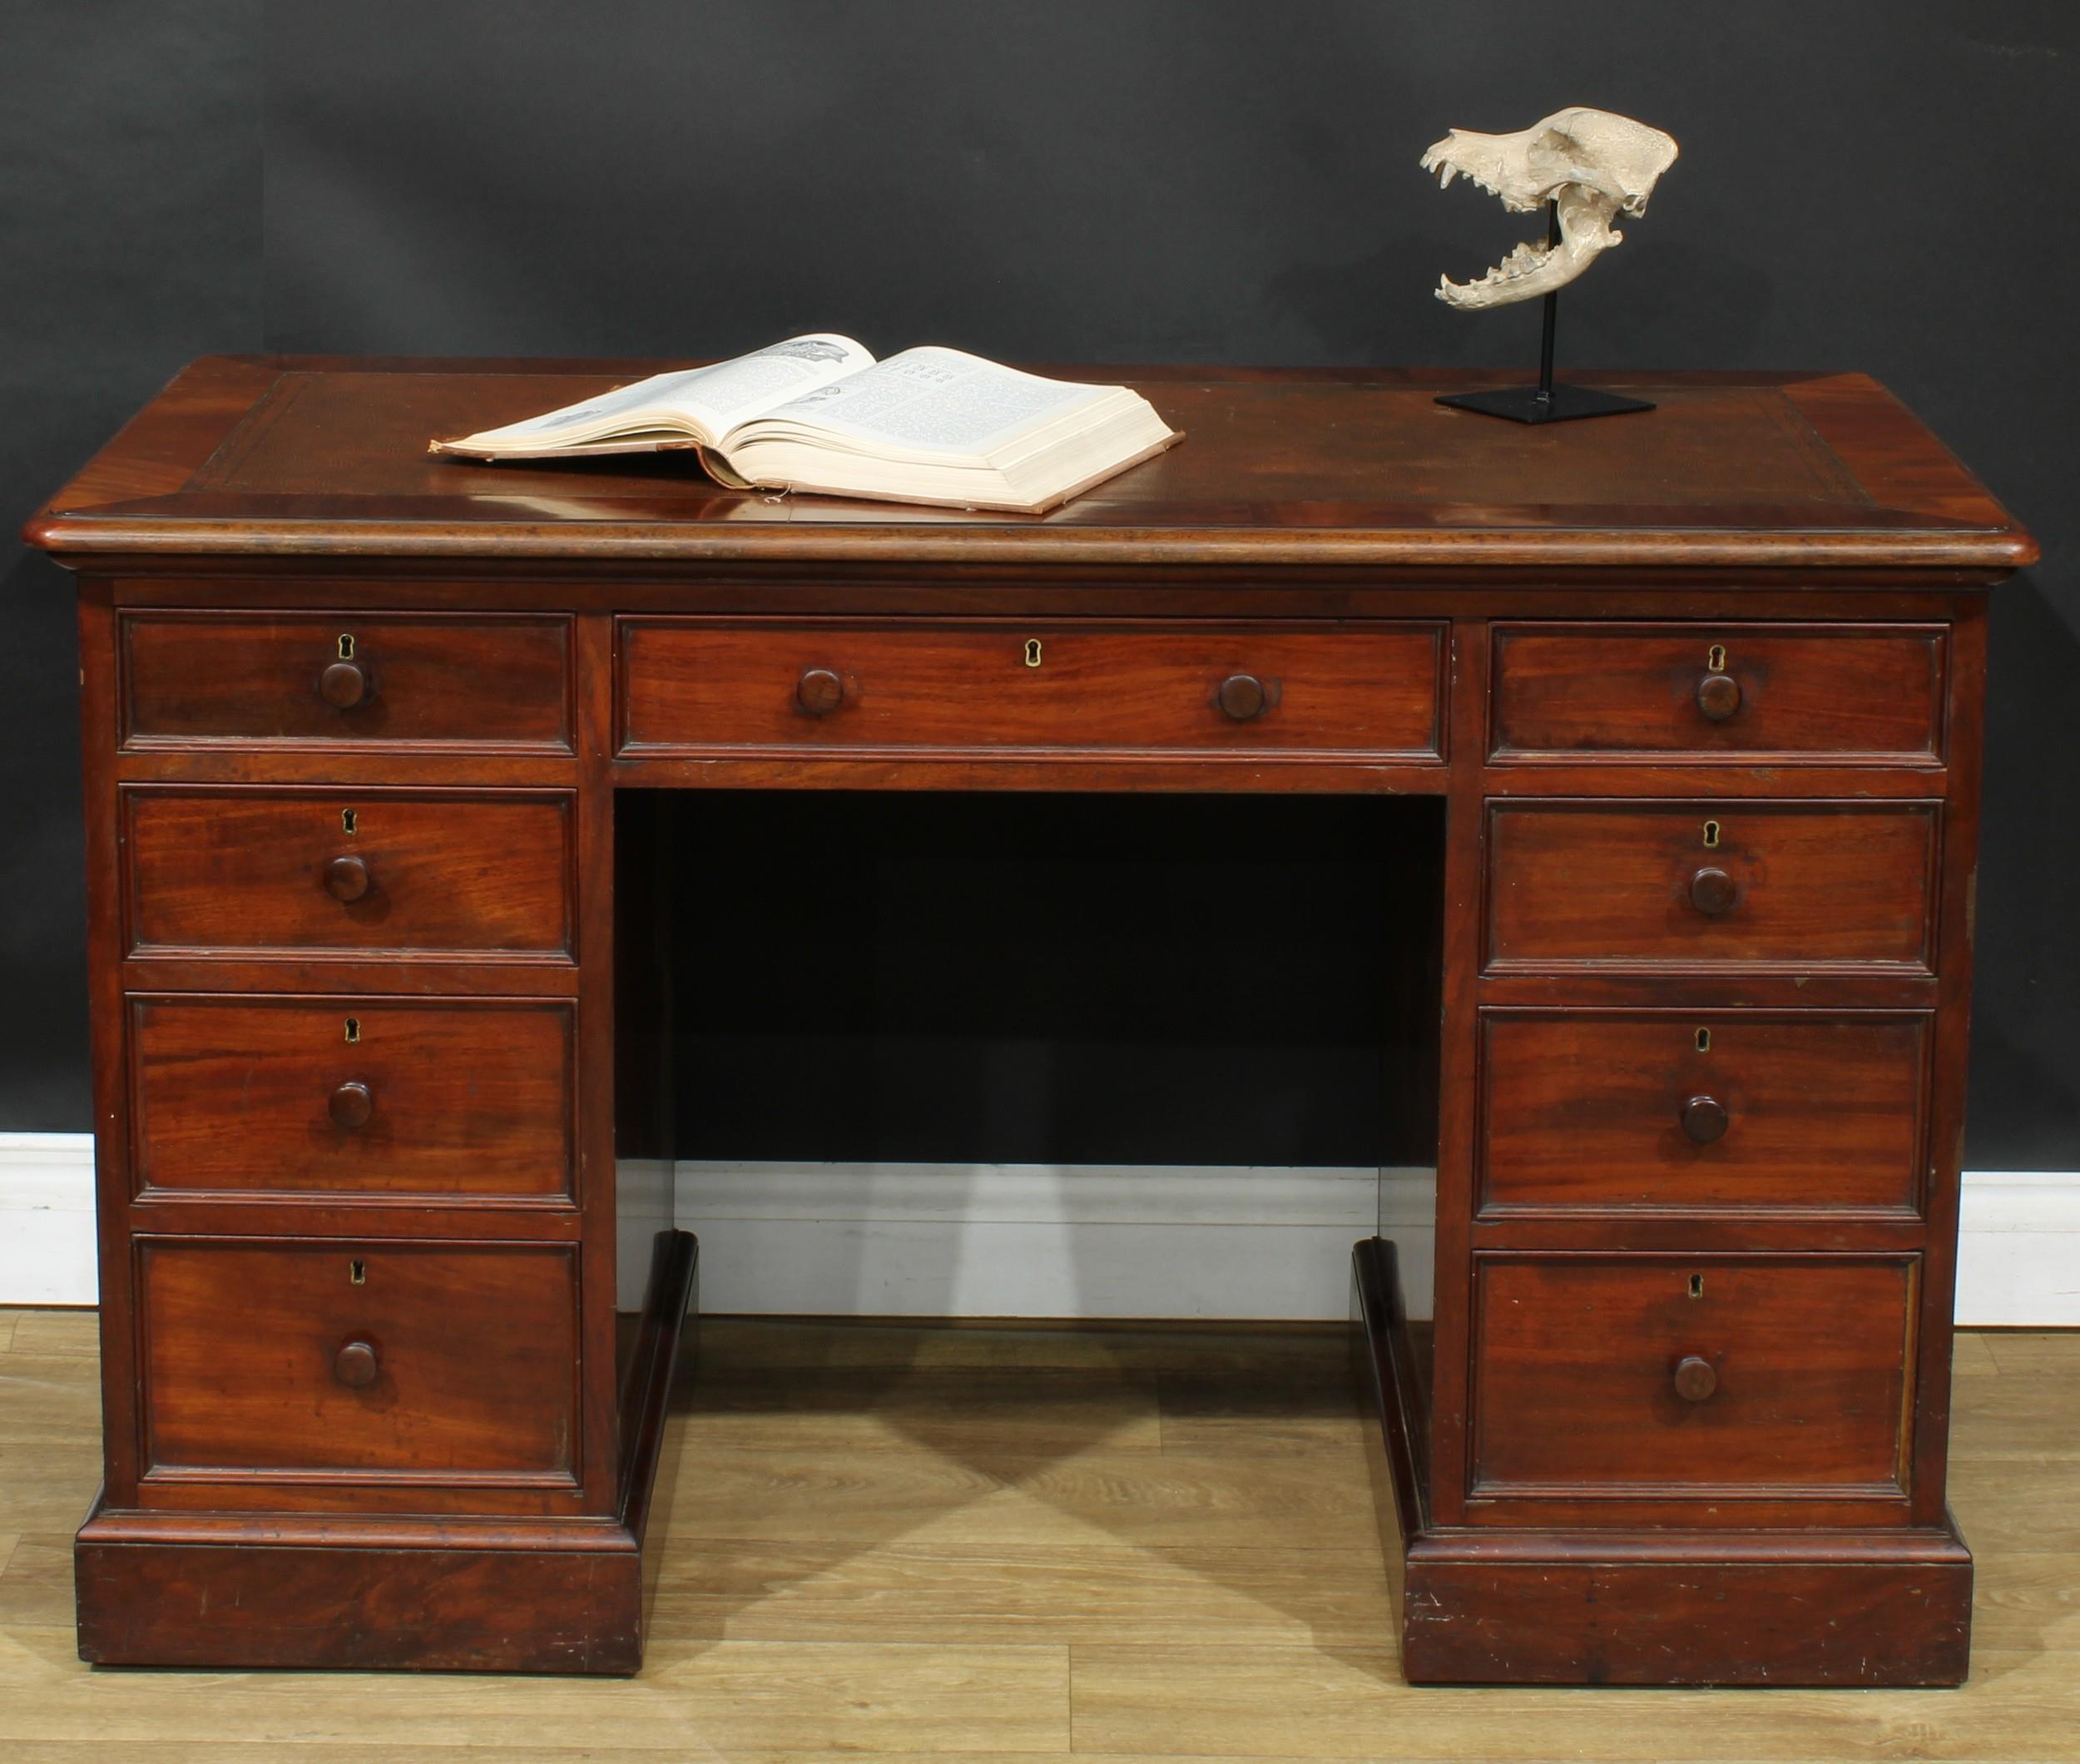 An early Victorian mahogany partners’ desk, by Miles & Edwards, 134 Oxford Street, London, stamped